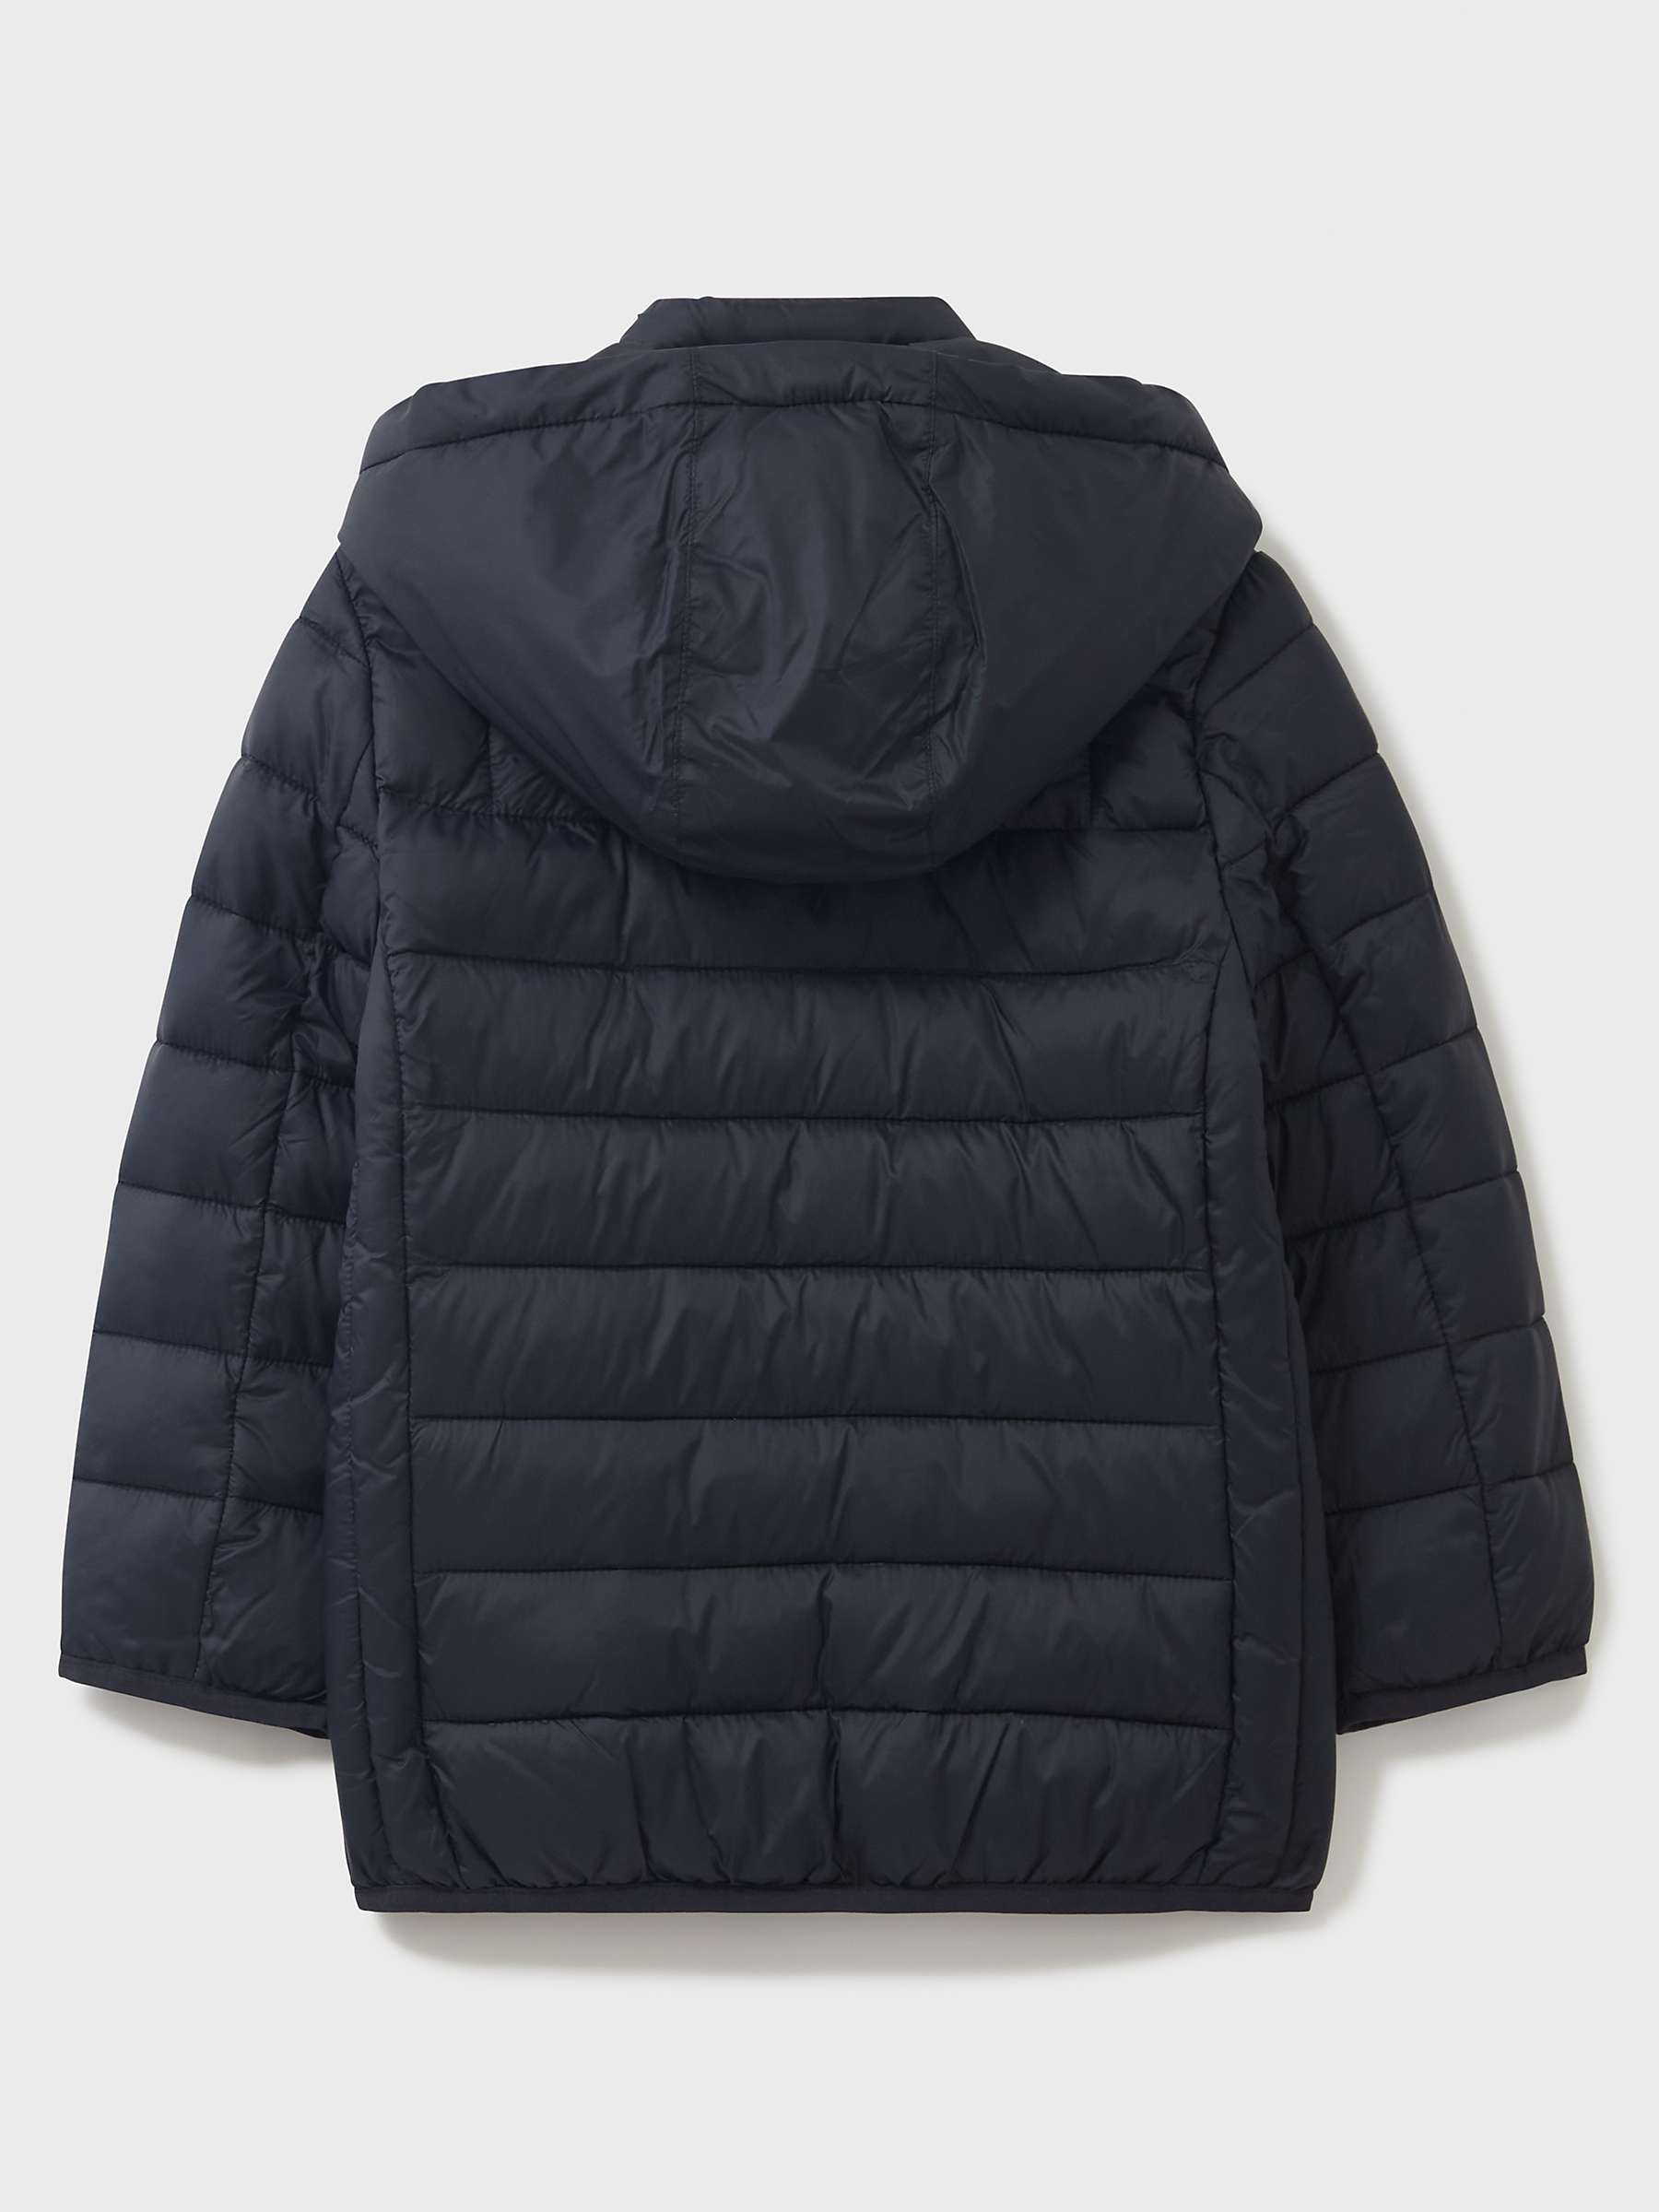 Buy Crew Clothing Kids' Plain Quilted Jacket Online at johnlewis.com